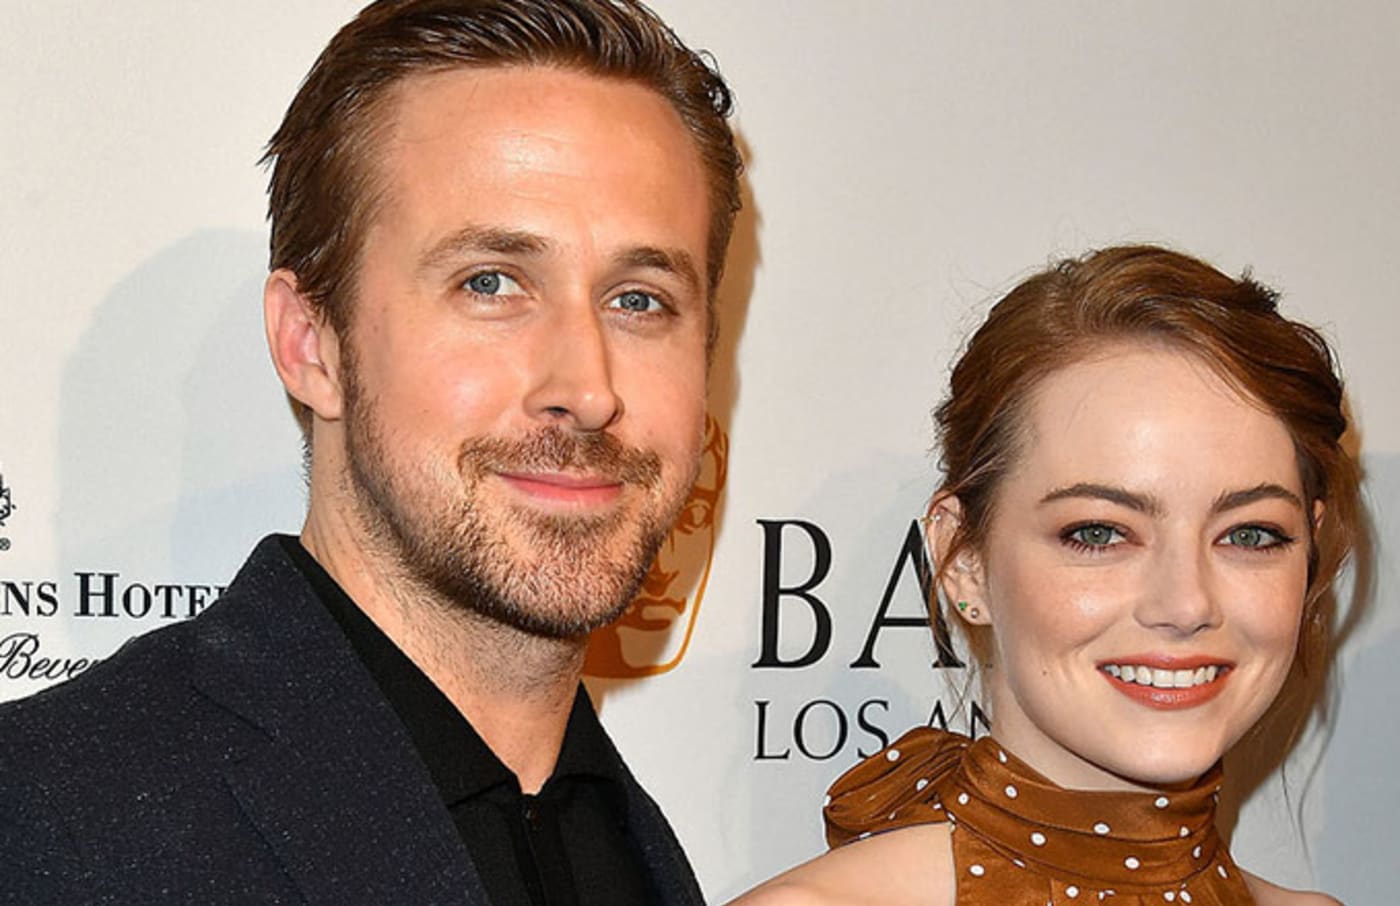 This is a photo of Ryan Gosling and Emma Stone.